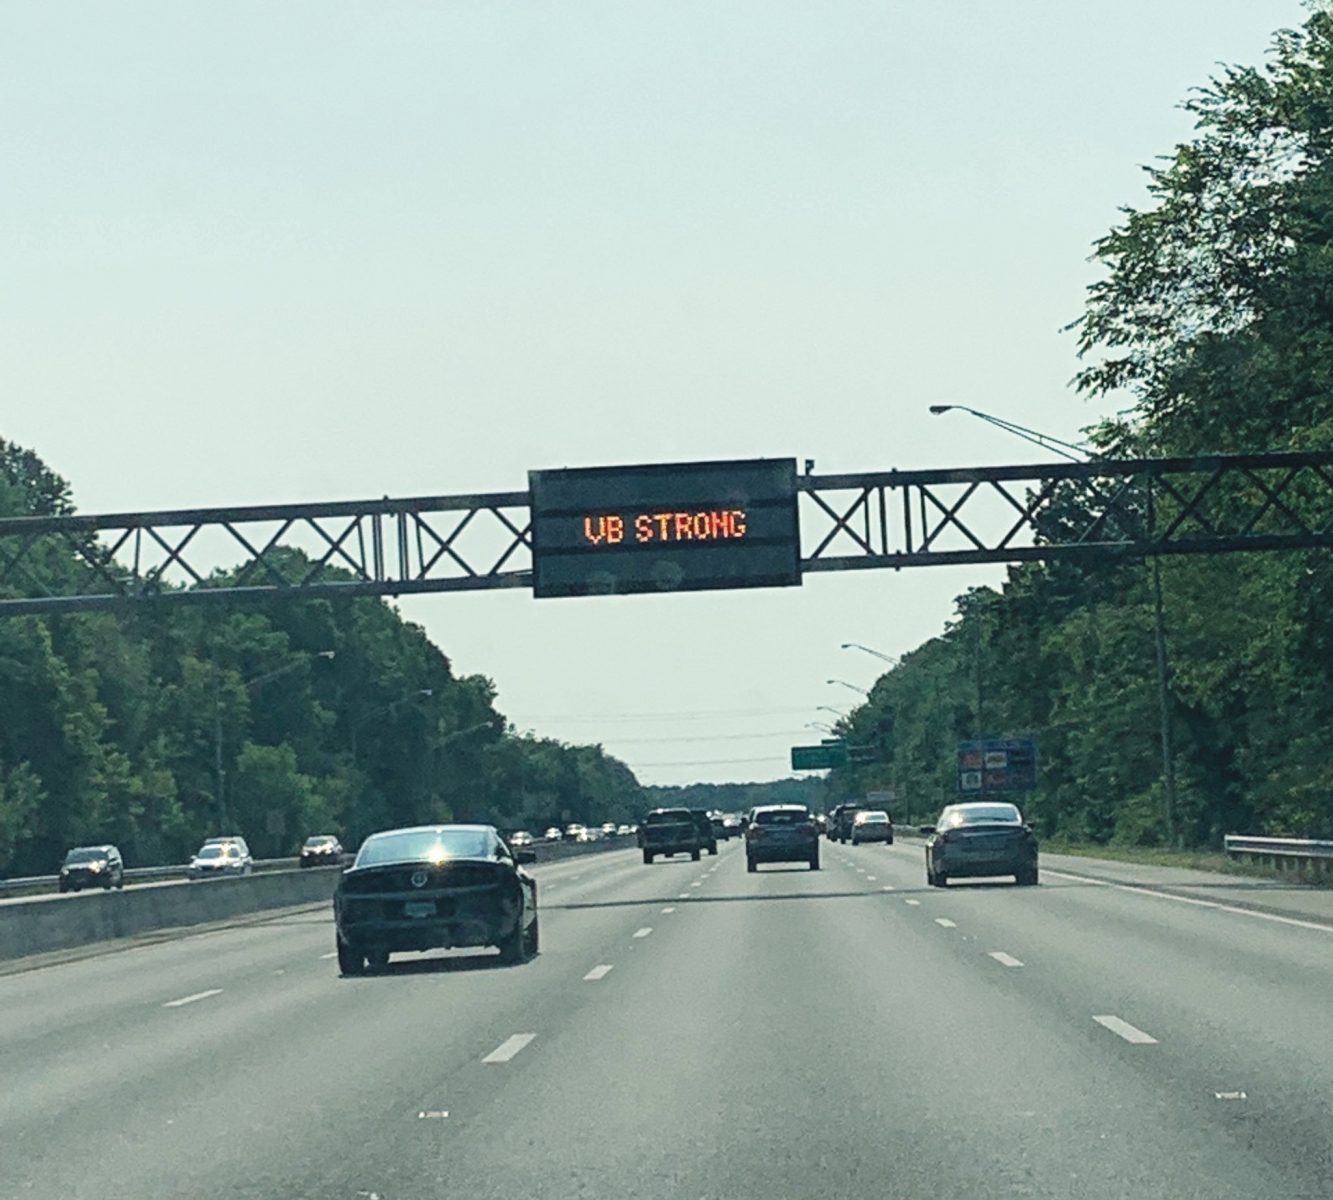 VBStrong on the Highway